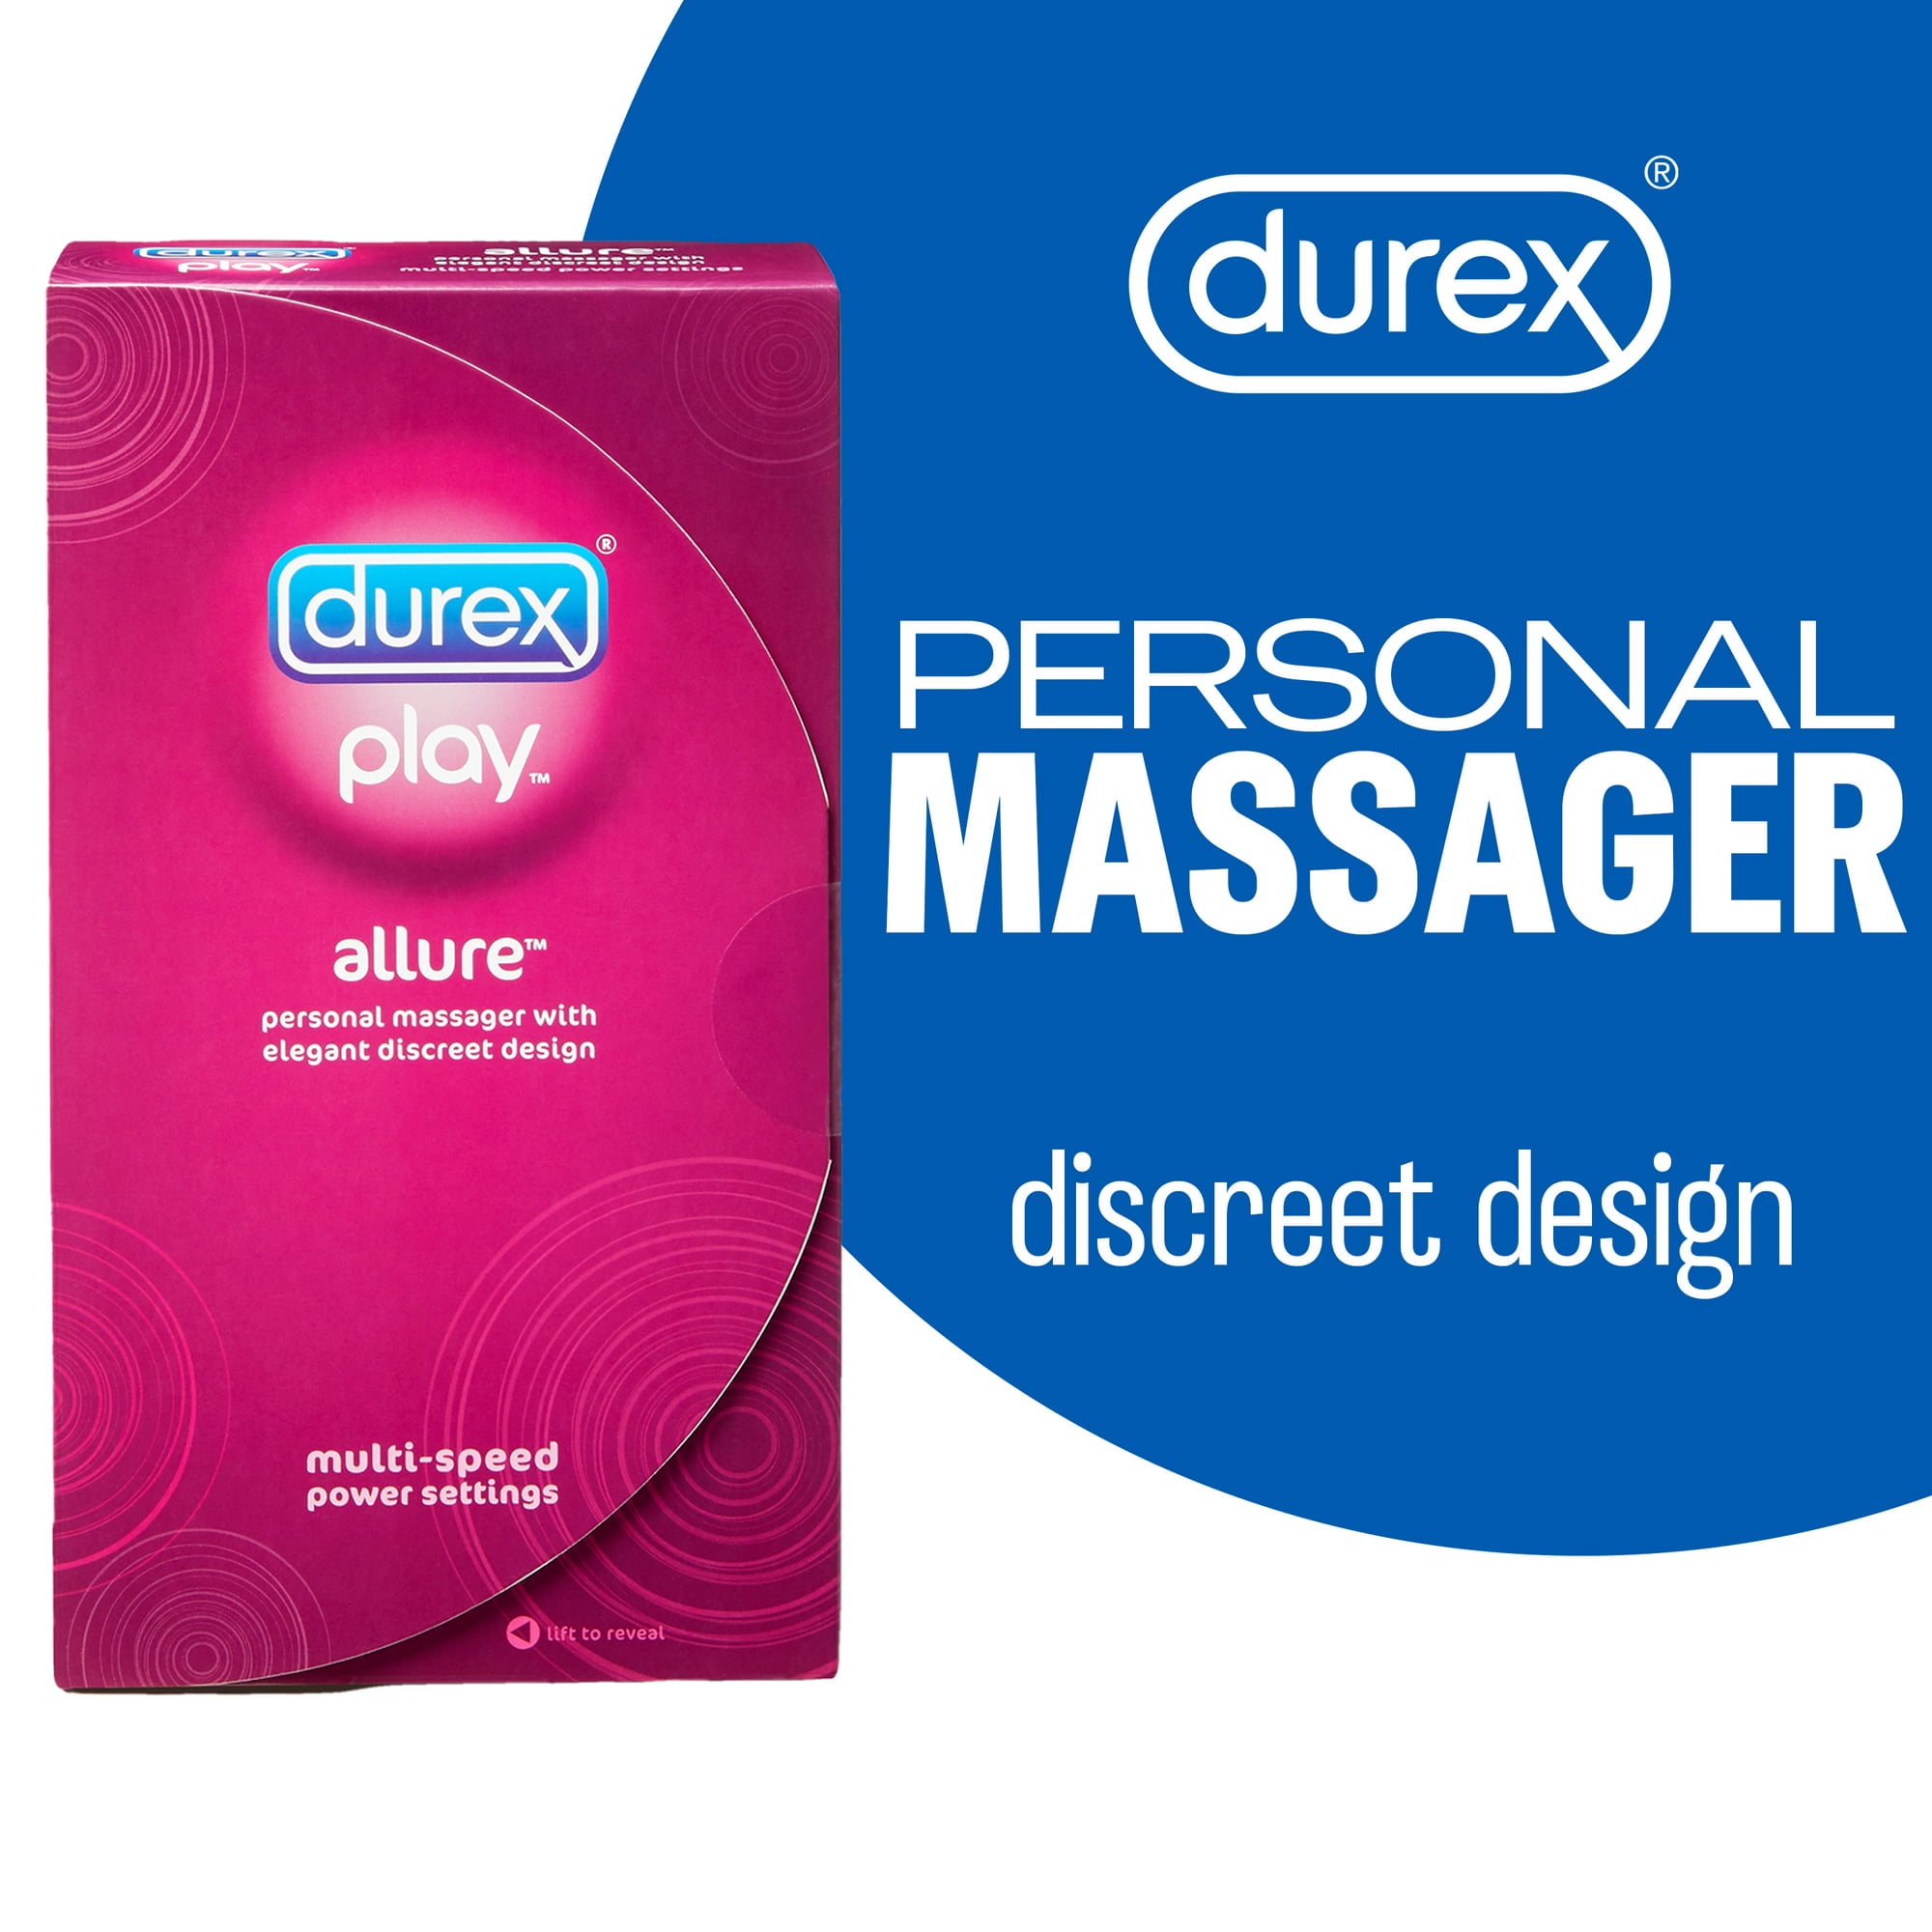 Best of Play allure personal massager